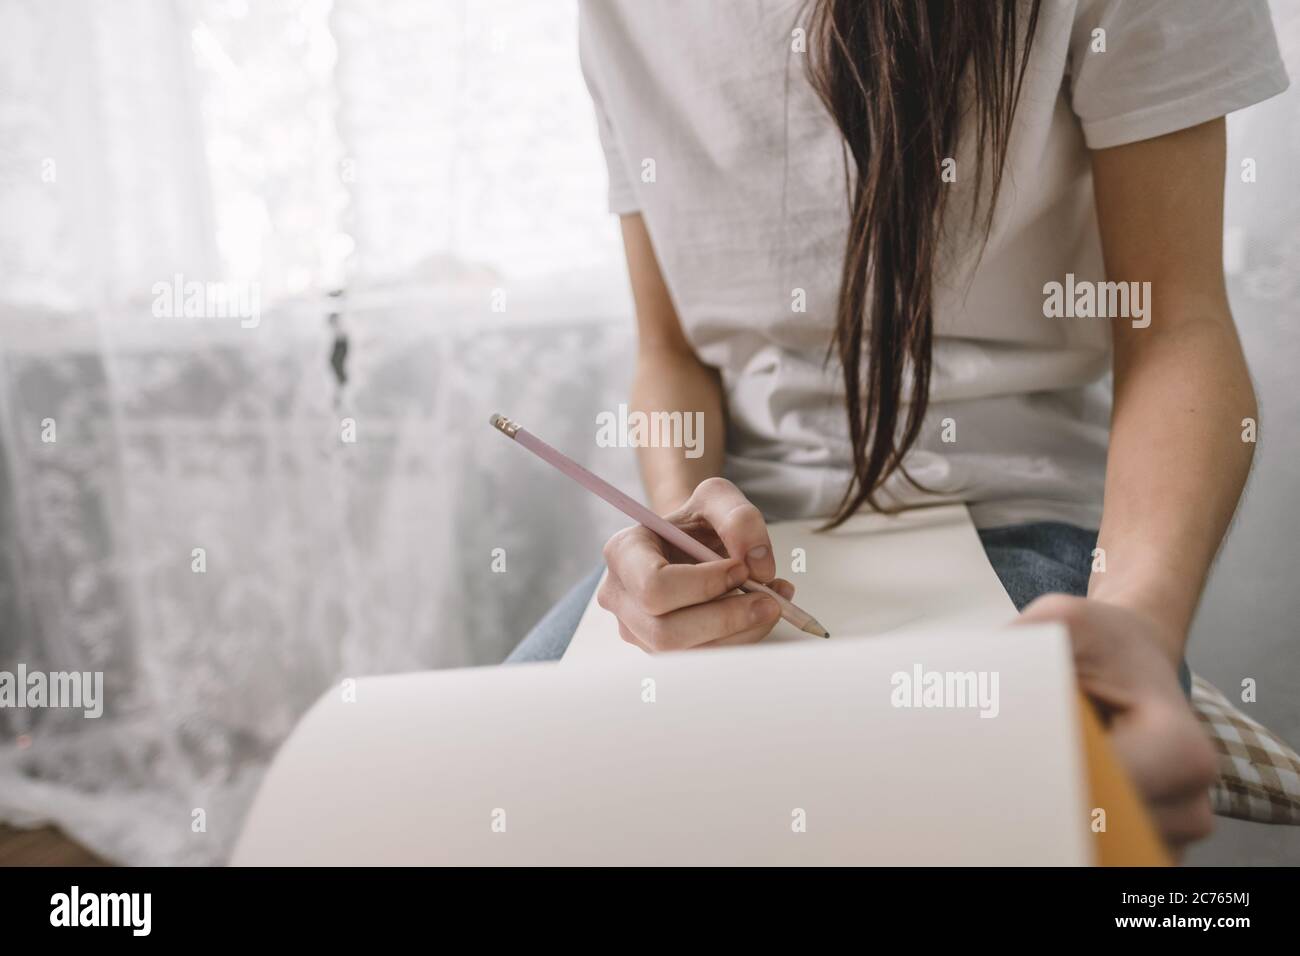 Woman artist draws in a sketchbook at home near the window, sitting on a chair Stock Photo